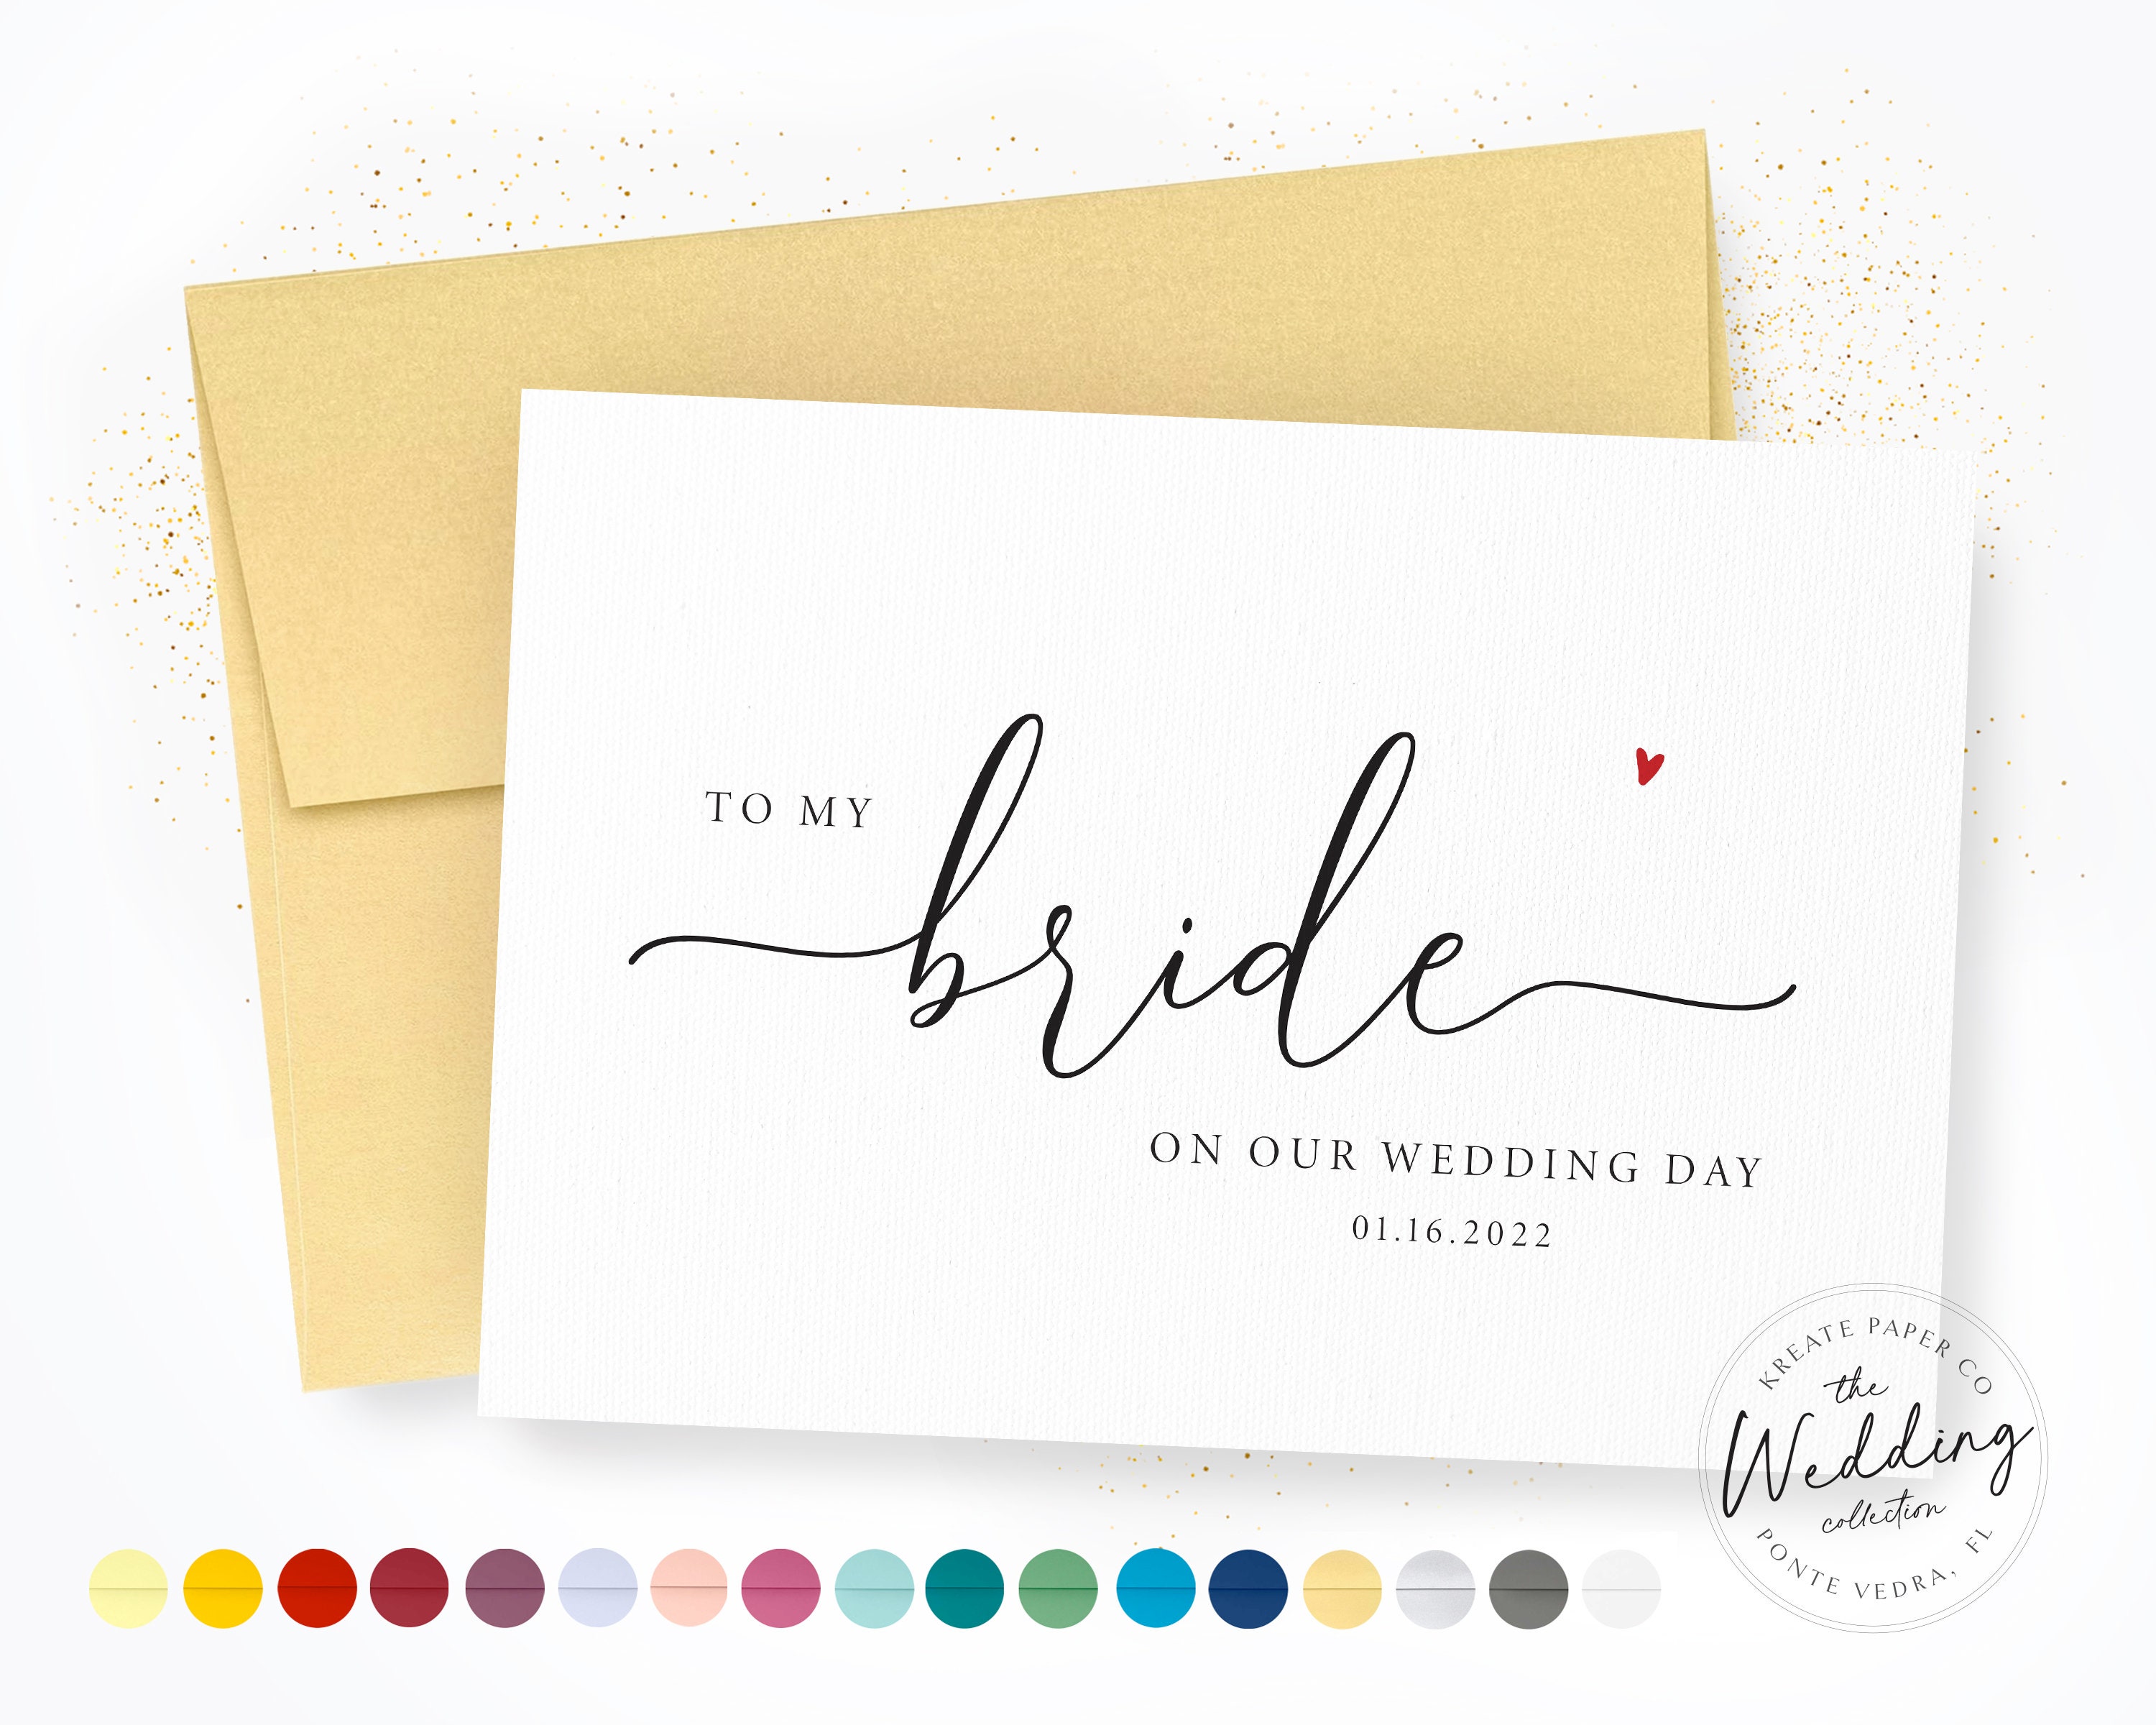 Details about   WIFE ON OUR WEDDING DAY CARD ~ BRIDE & GROOM DESIGN LARGE CARD & LOVELY VERSE 